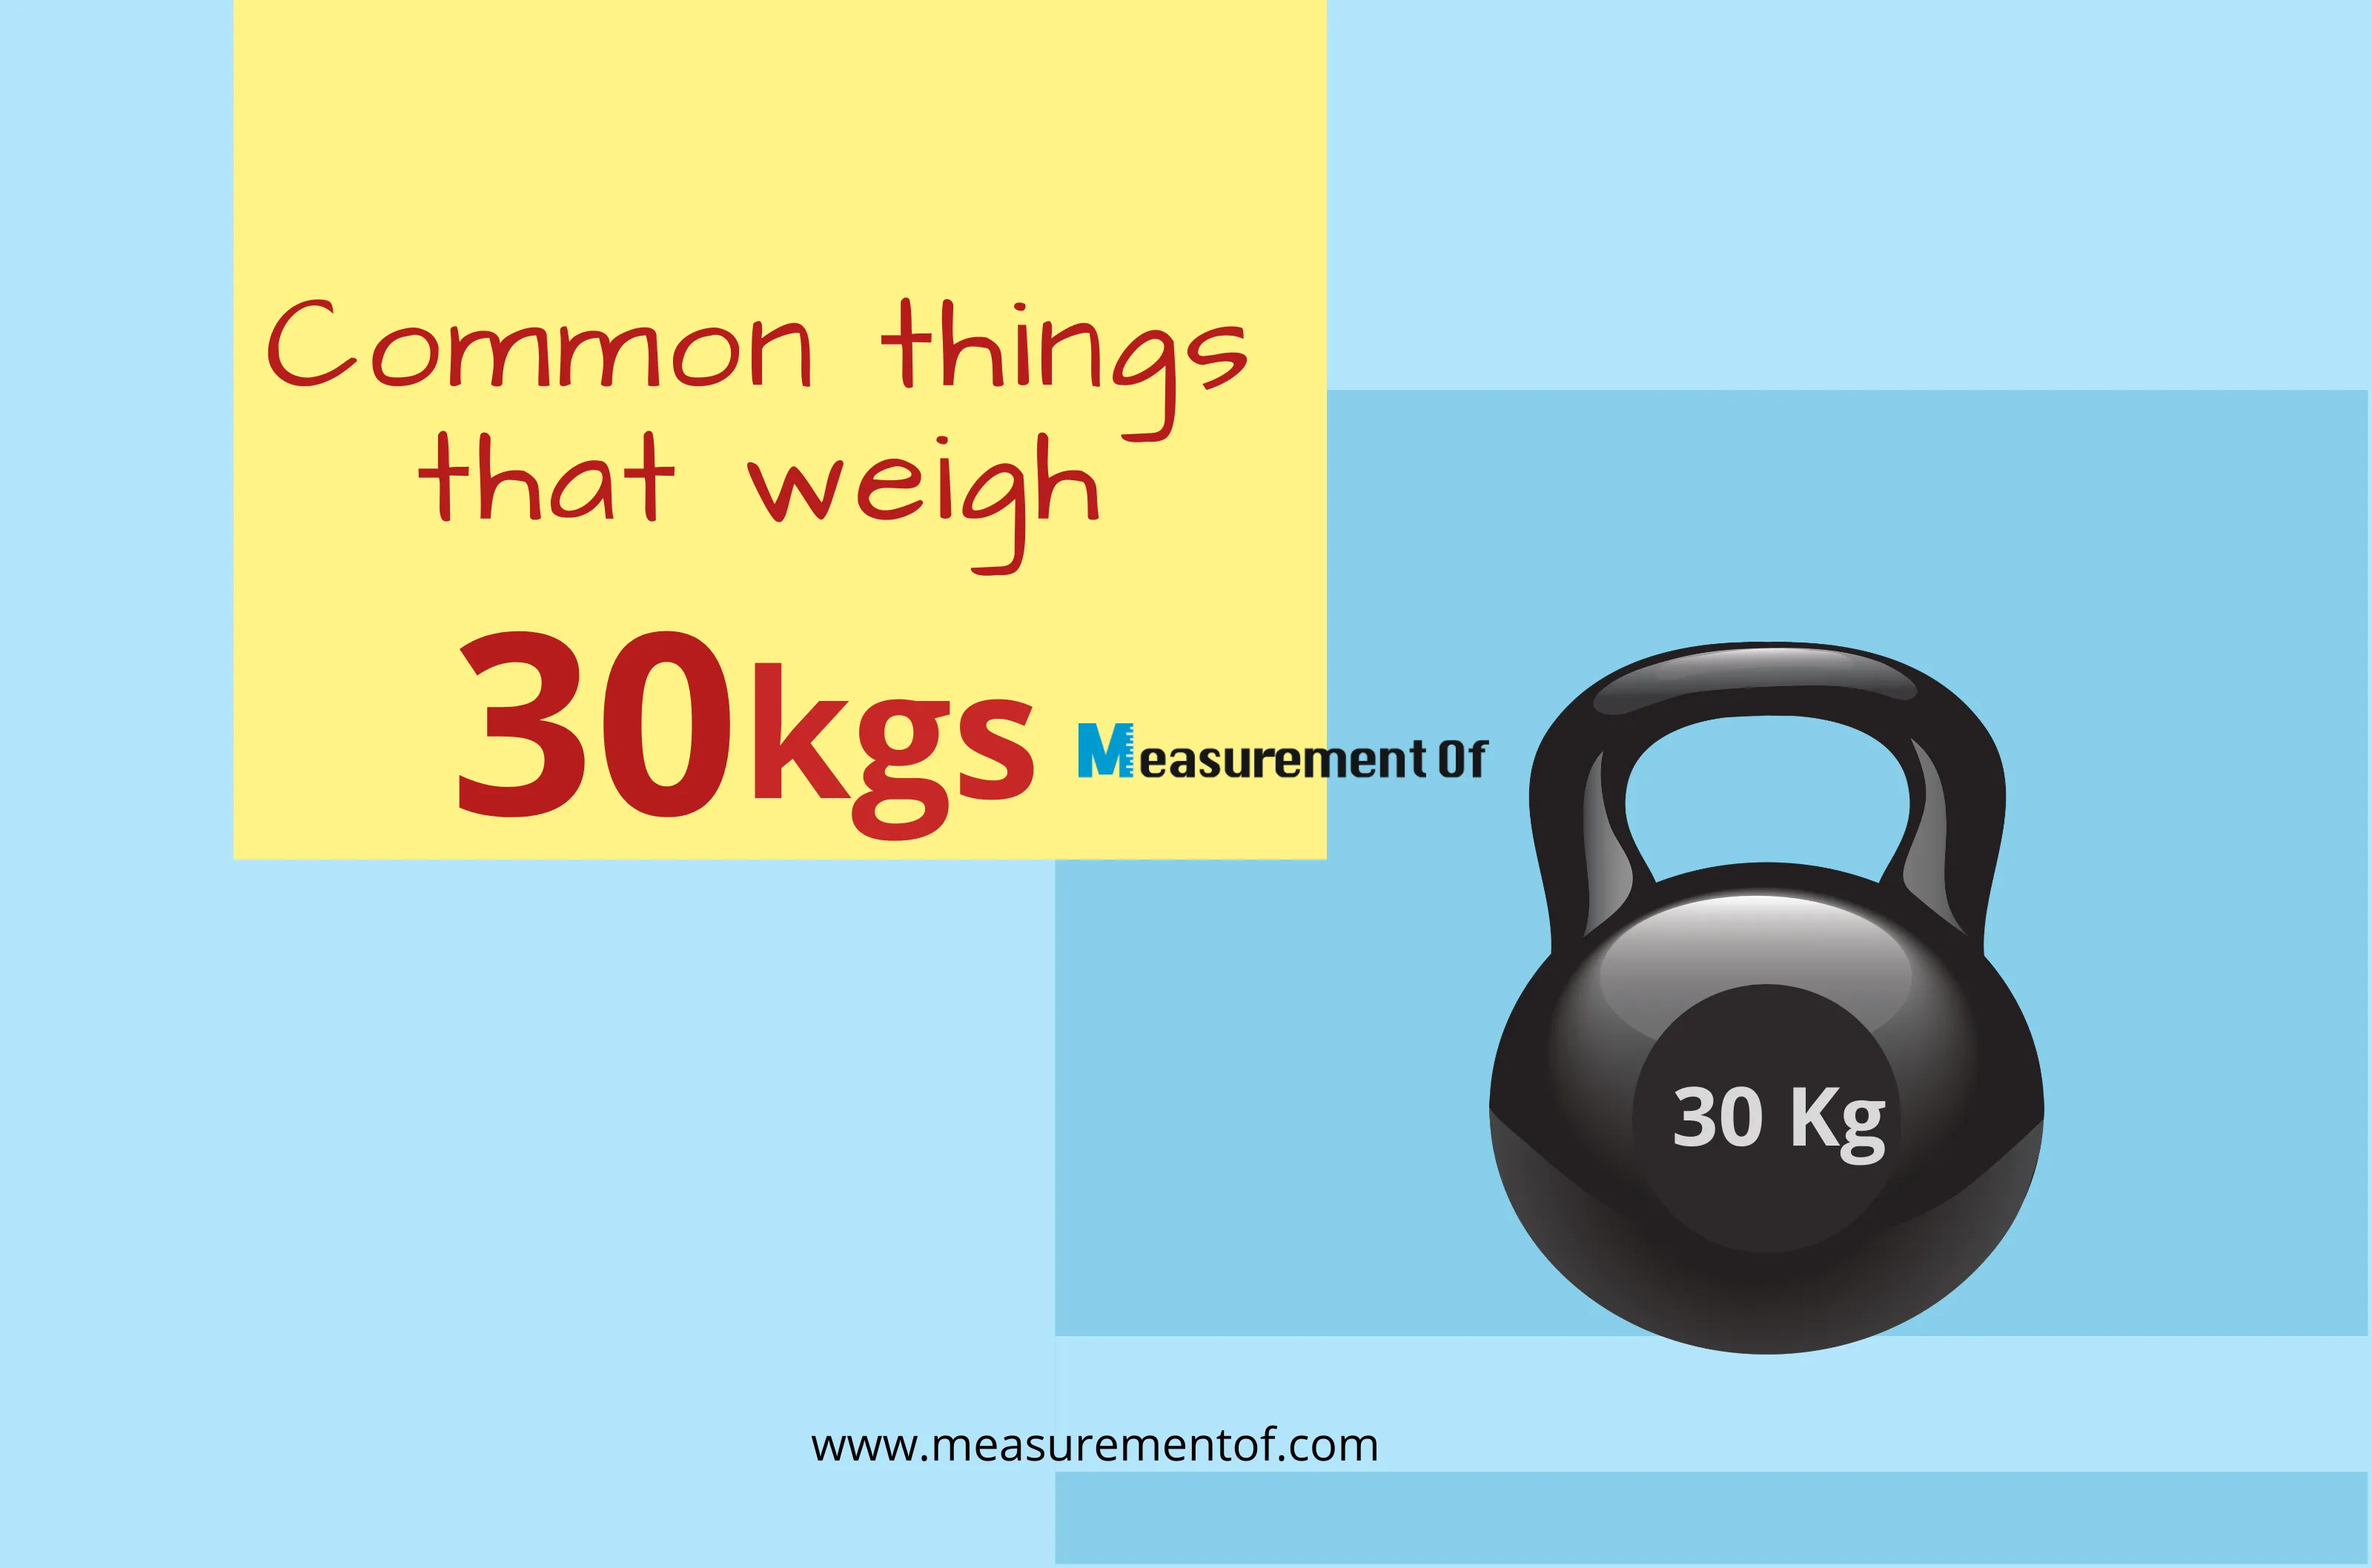 Common Things That are 30 Kgs weight reference